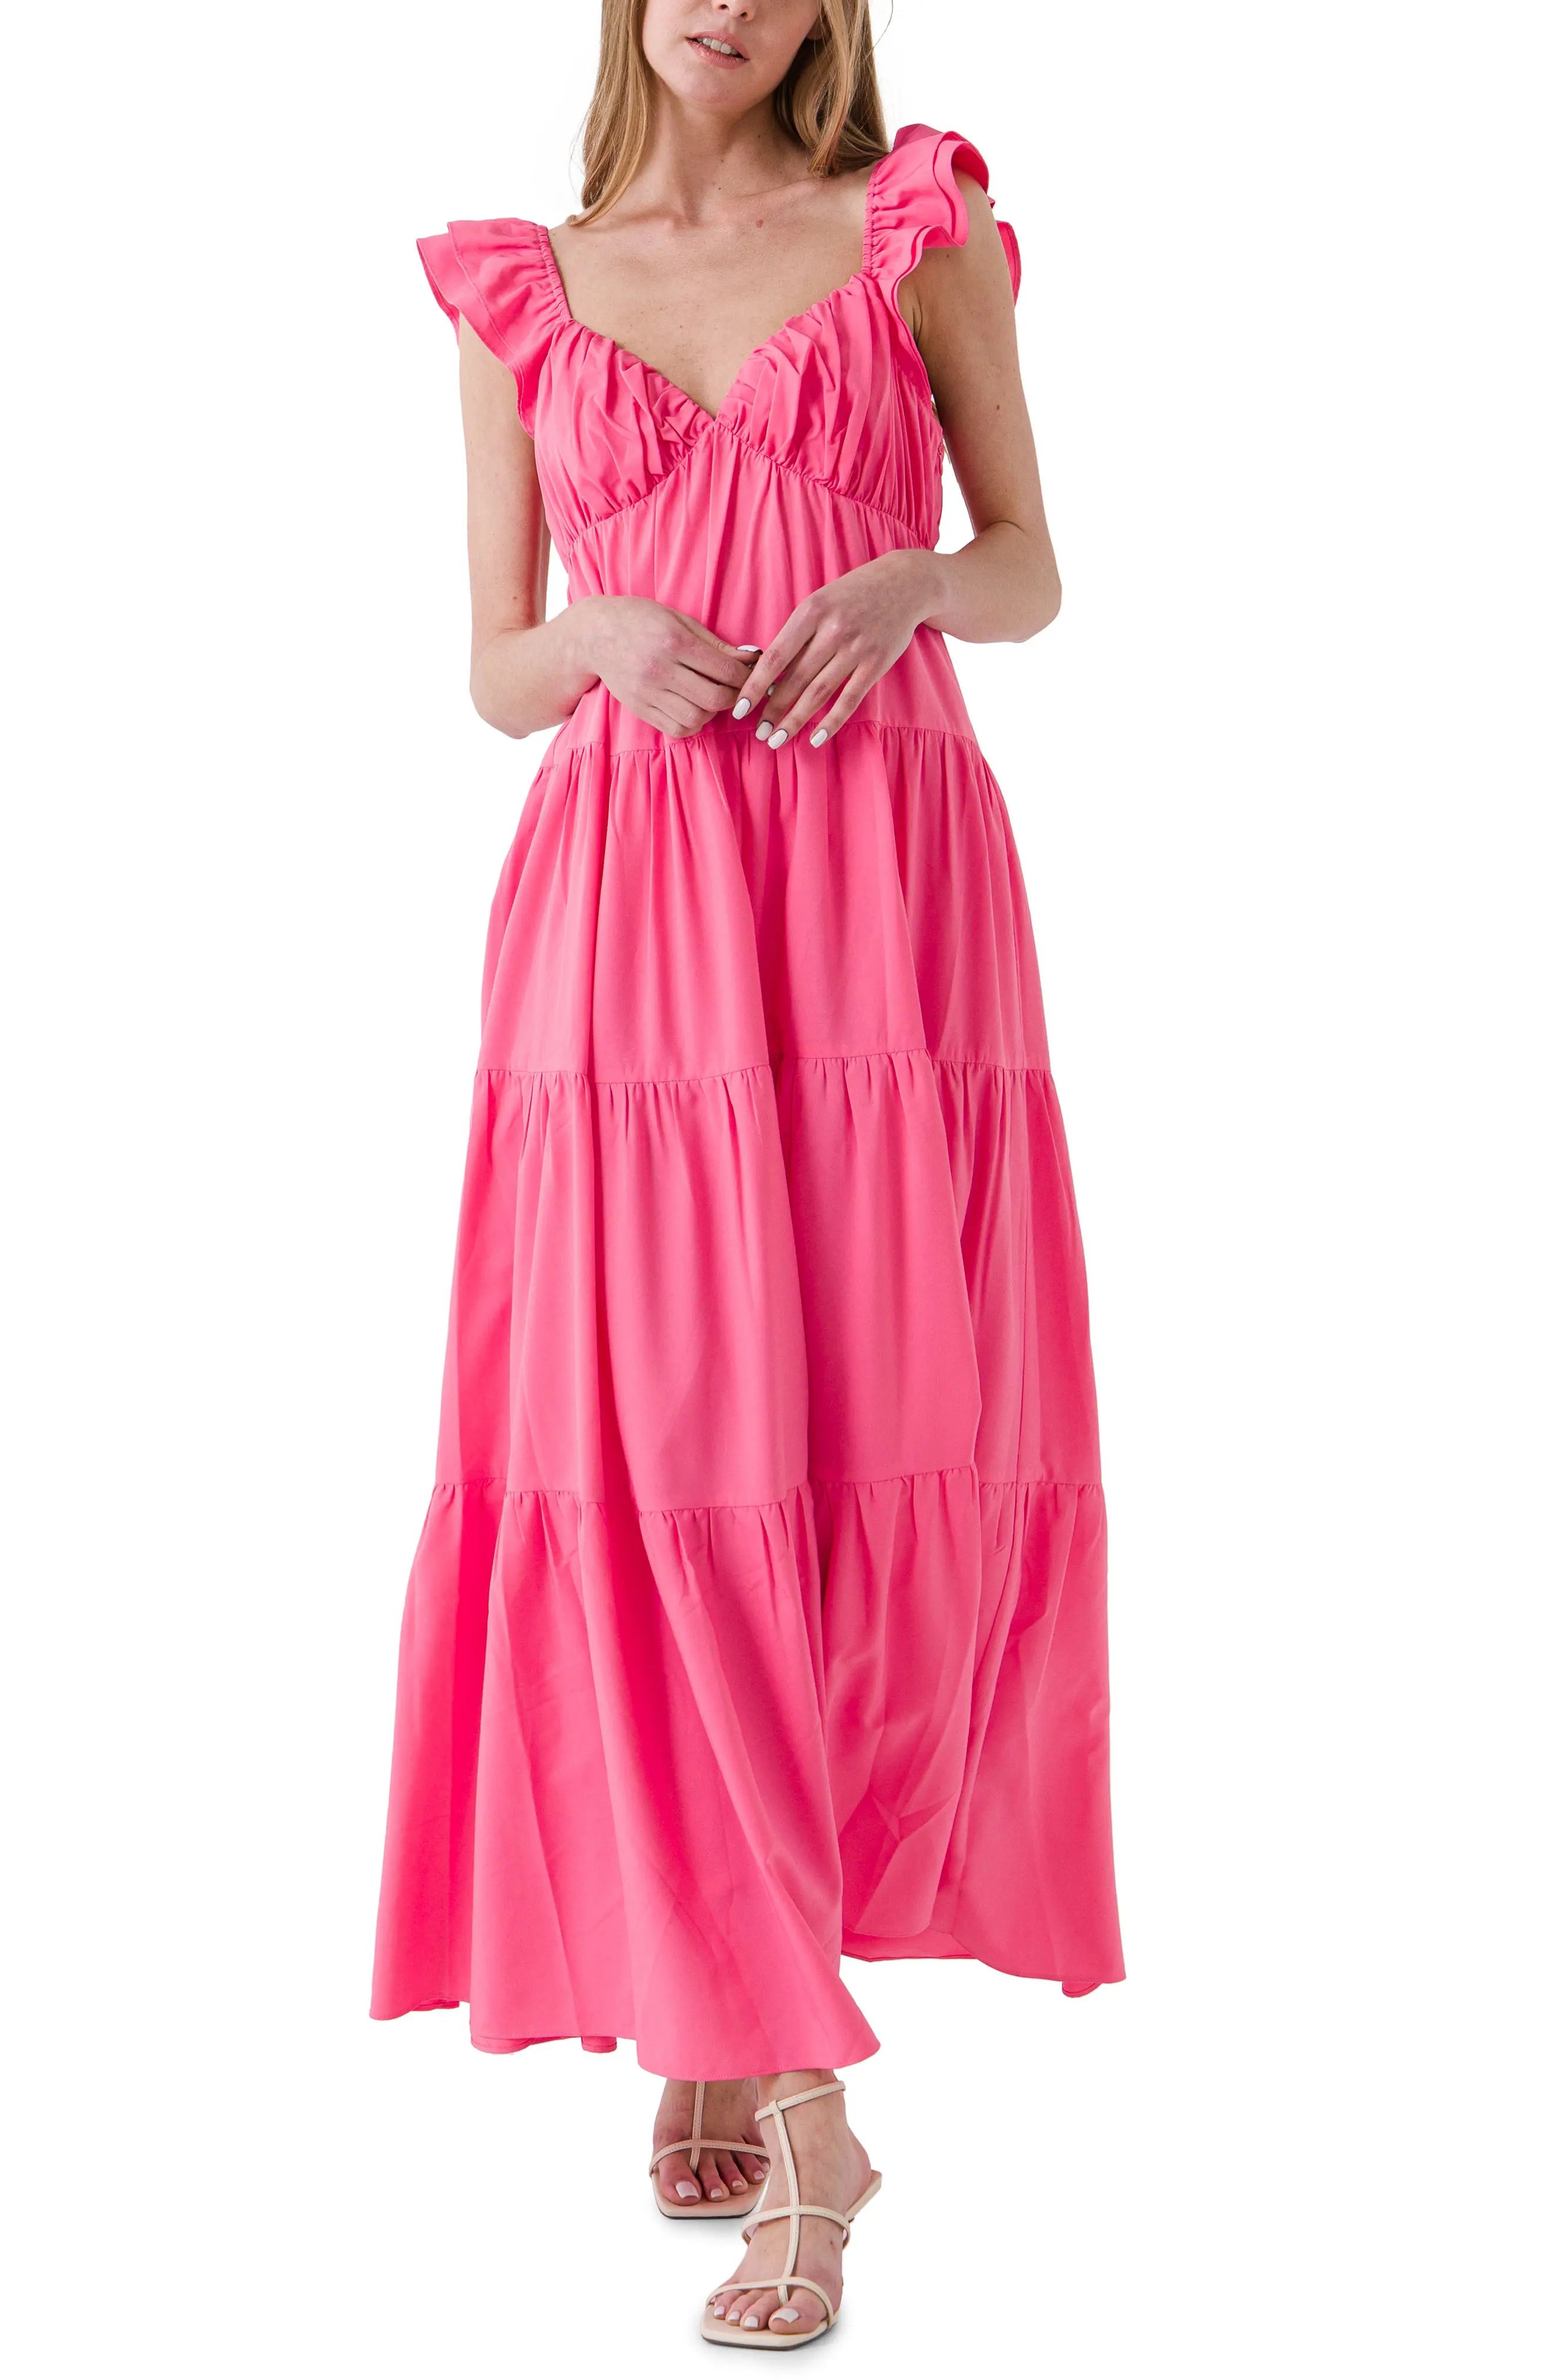 Free the Roses Ruffle Sleeve Maxi Dress, Size Medium in Pink at Nordstrom | Nordstrom